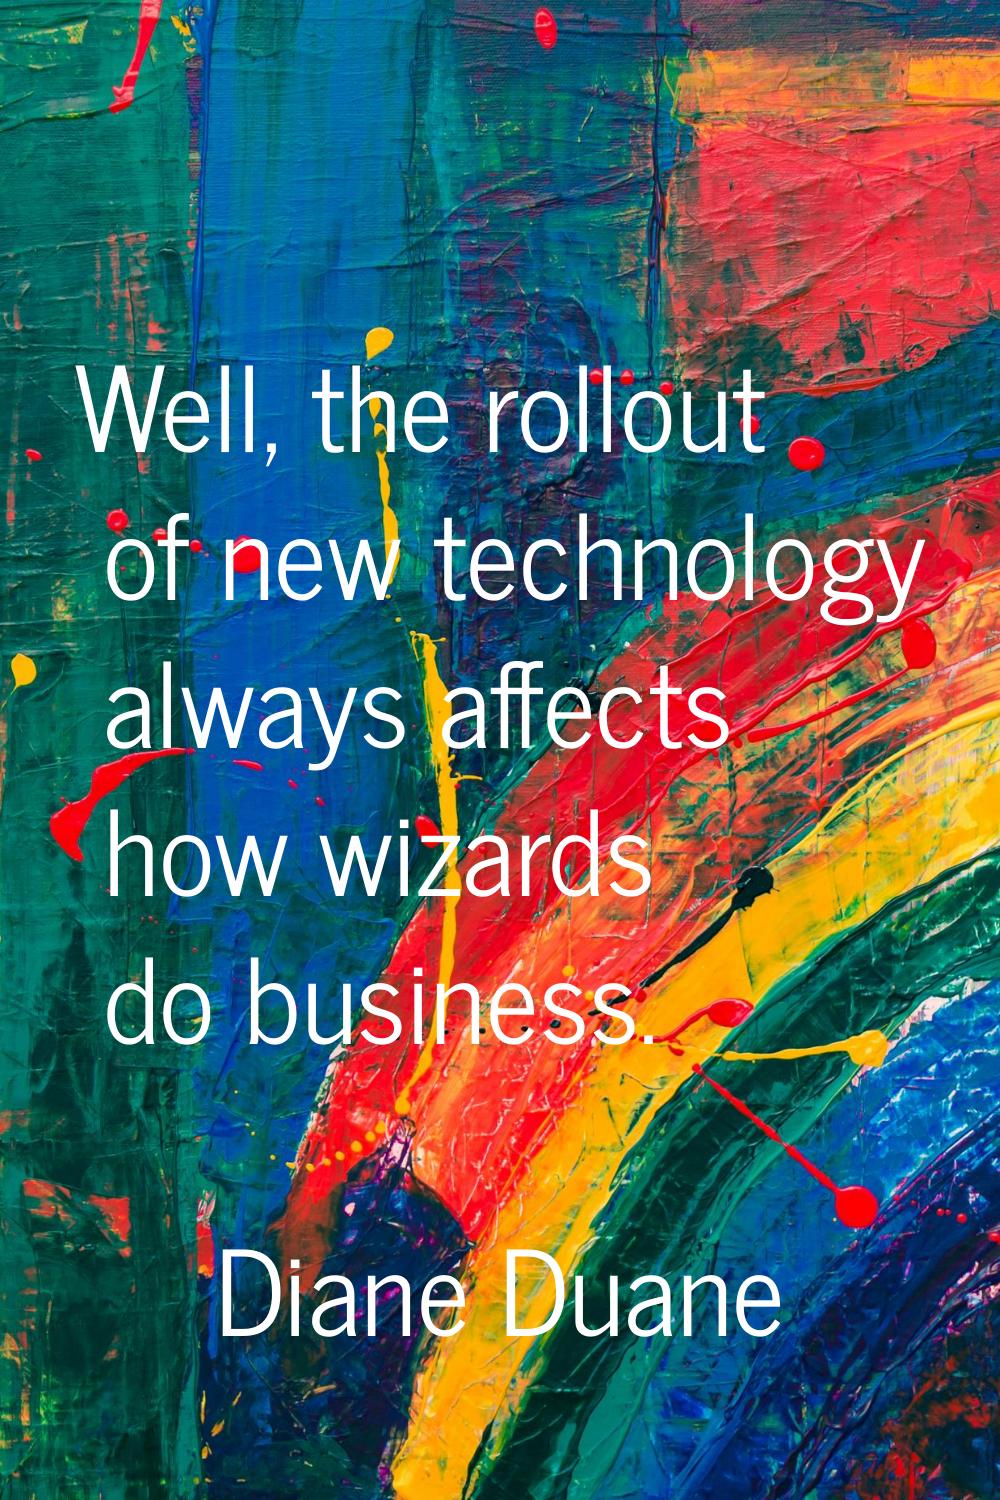 Well, the rollout of new technology always affects how wizards do business.